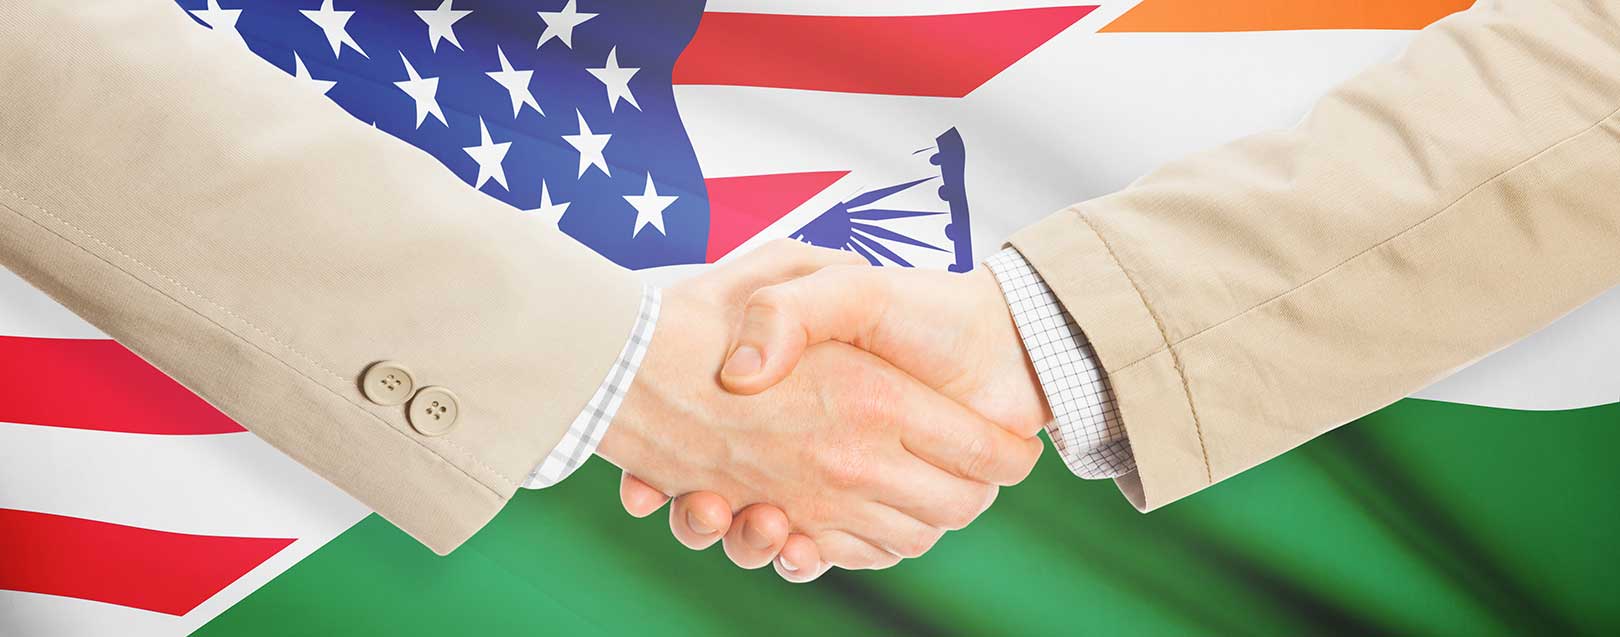 Trump keen on taking forward India-US relations